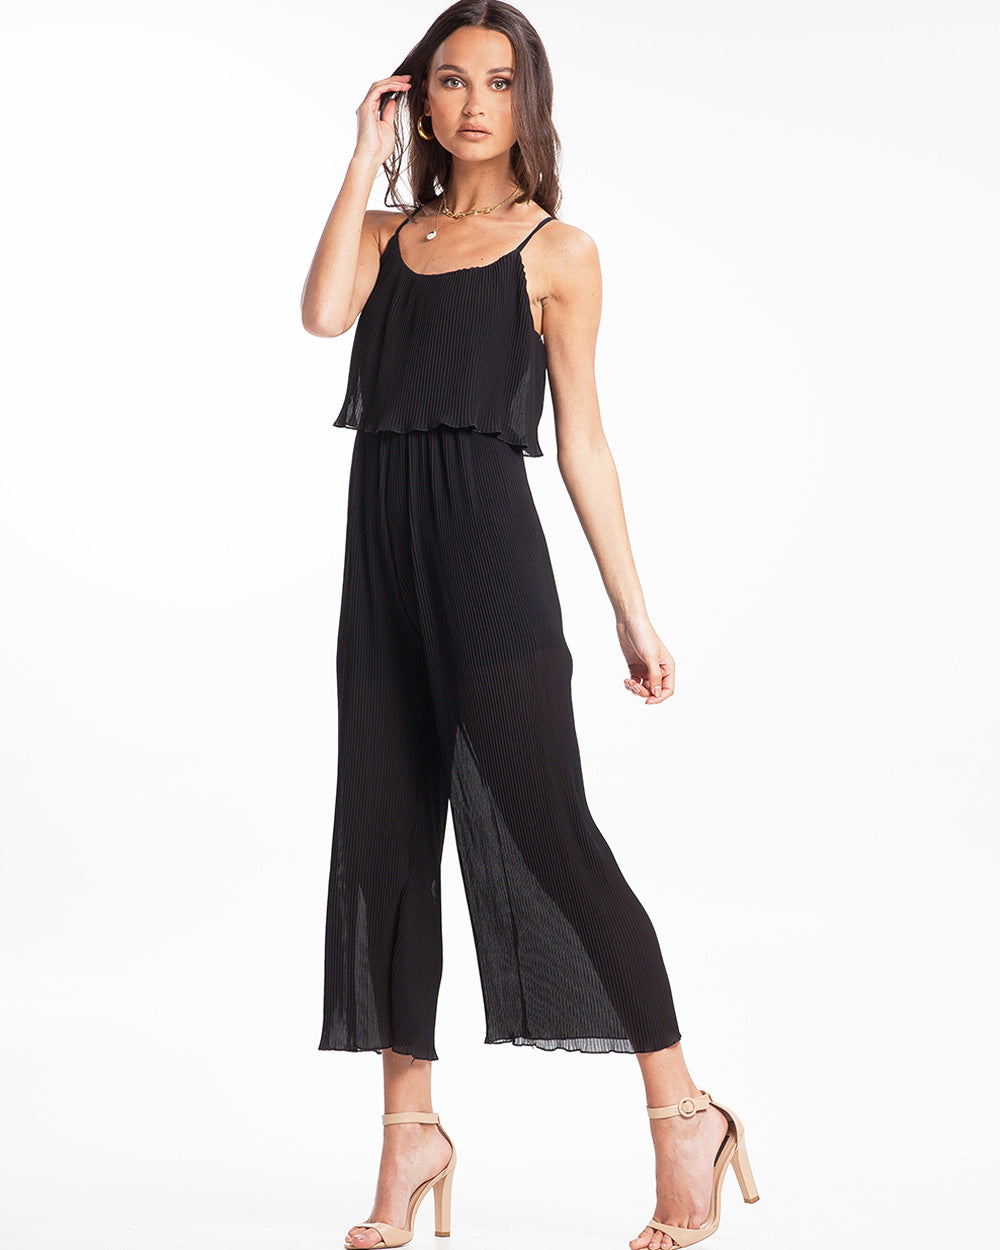 Say It To Me Palazzo Jumpsuit Black